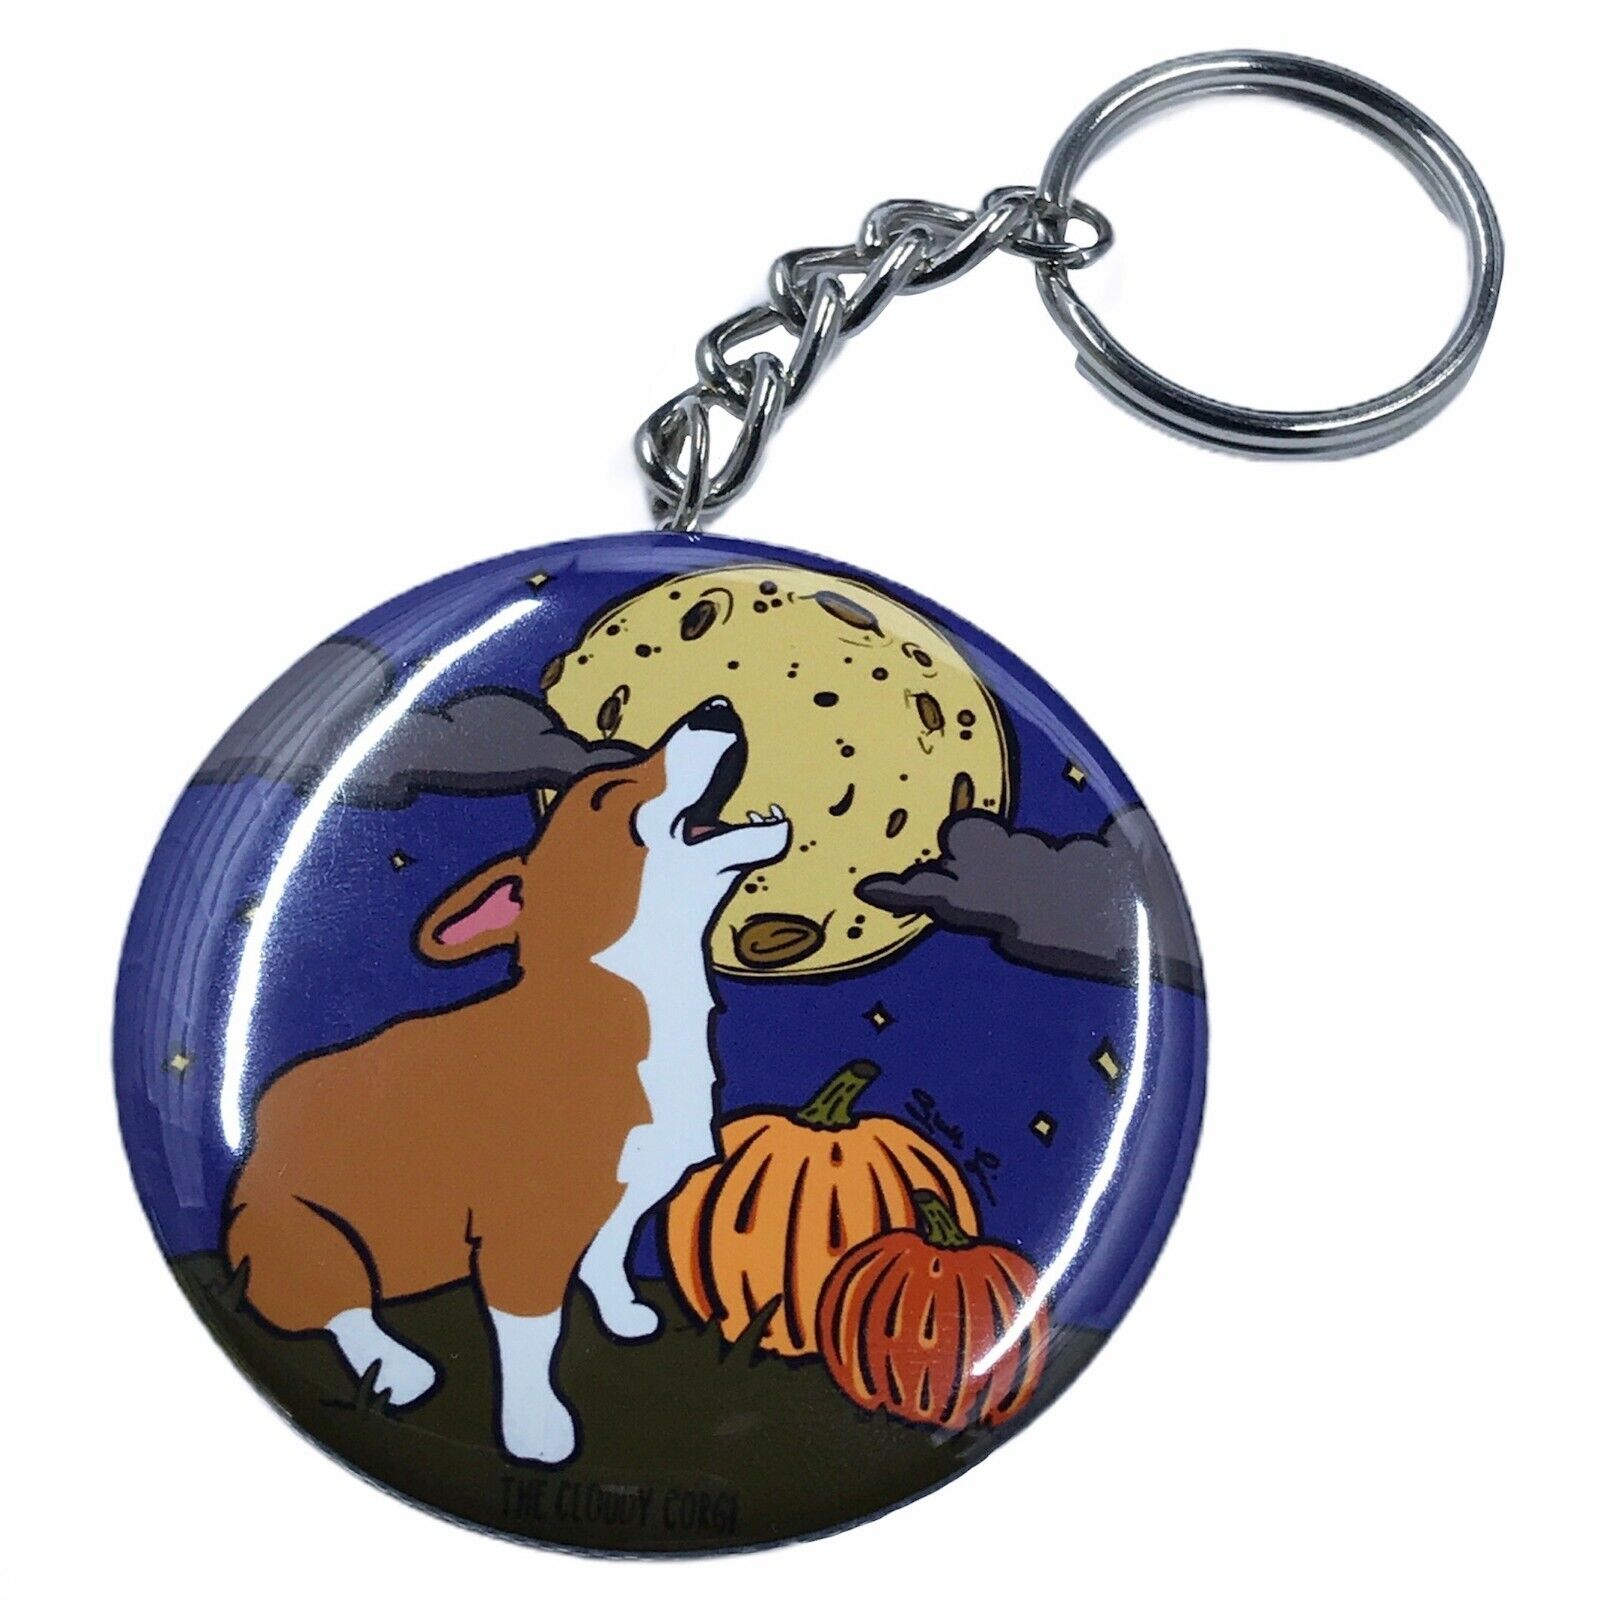 Corgi Dog Howling At The Moon Keychain Funny Halloween Key Ring Accessories